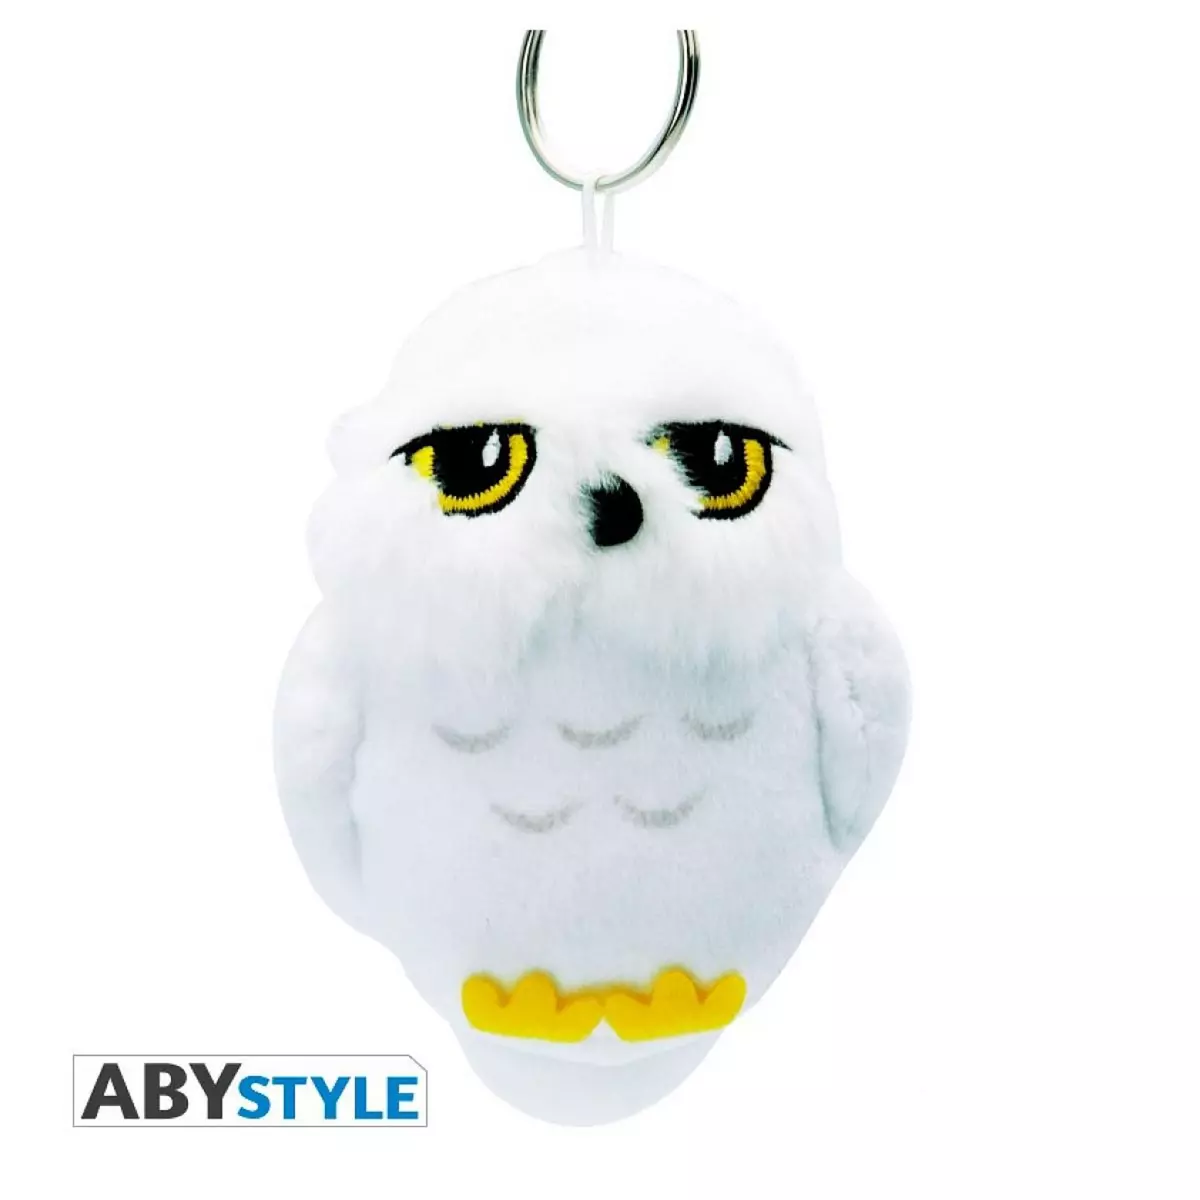 ABYstyle Porte clés peluche Hedwige